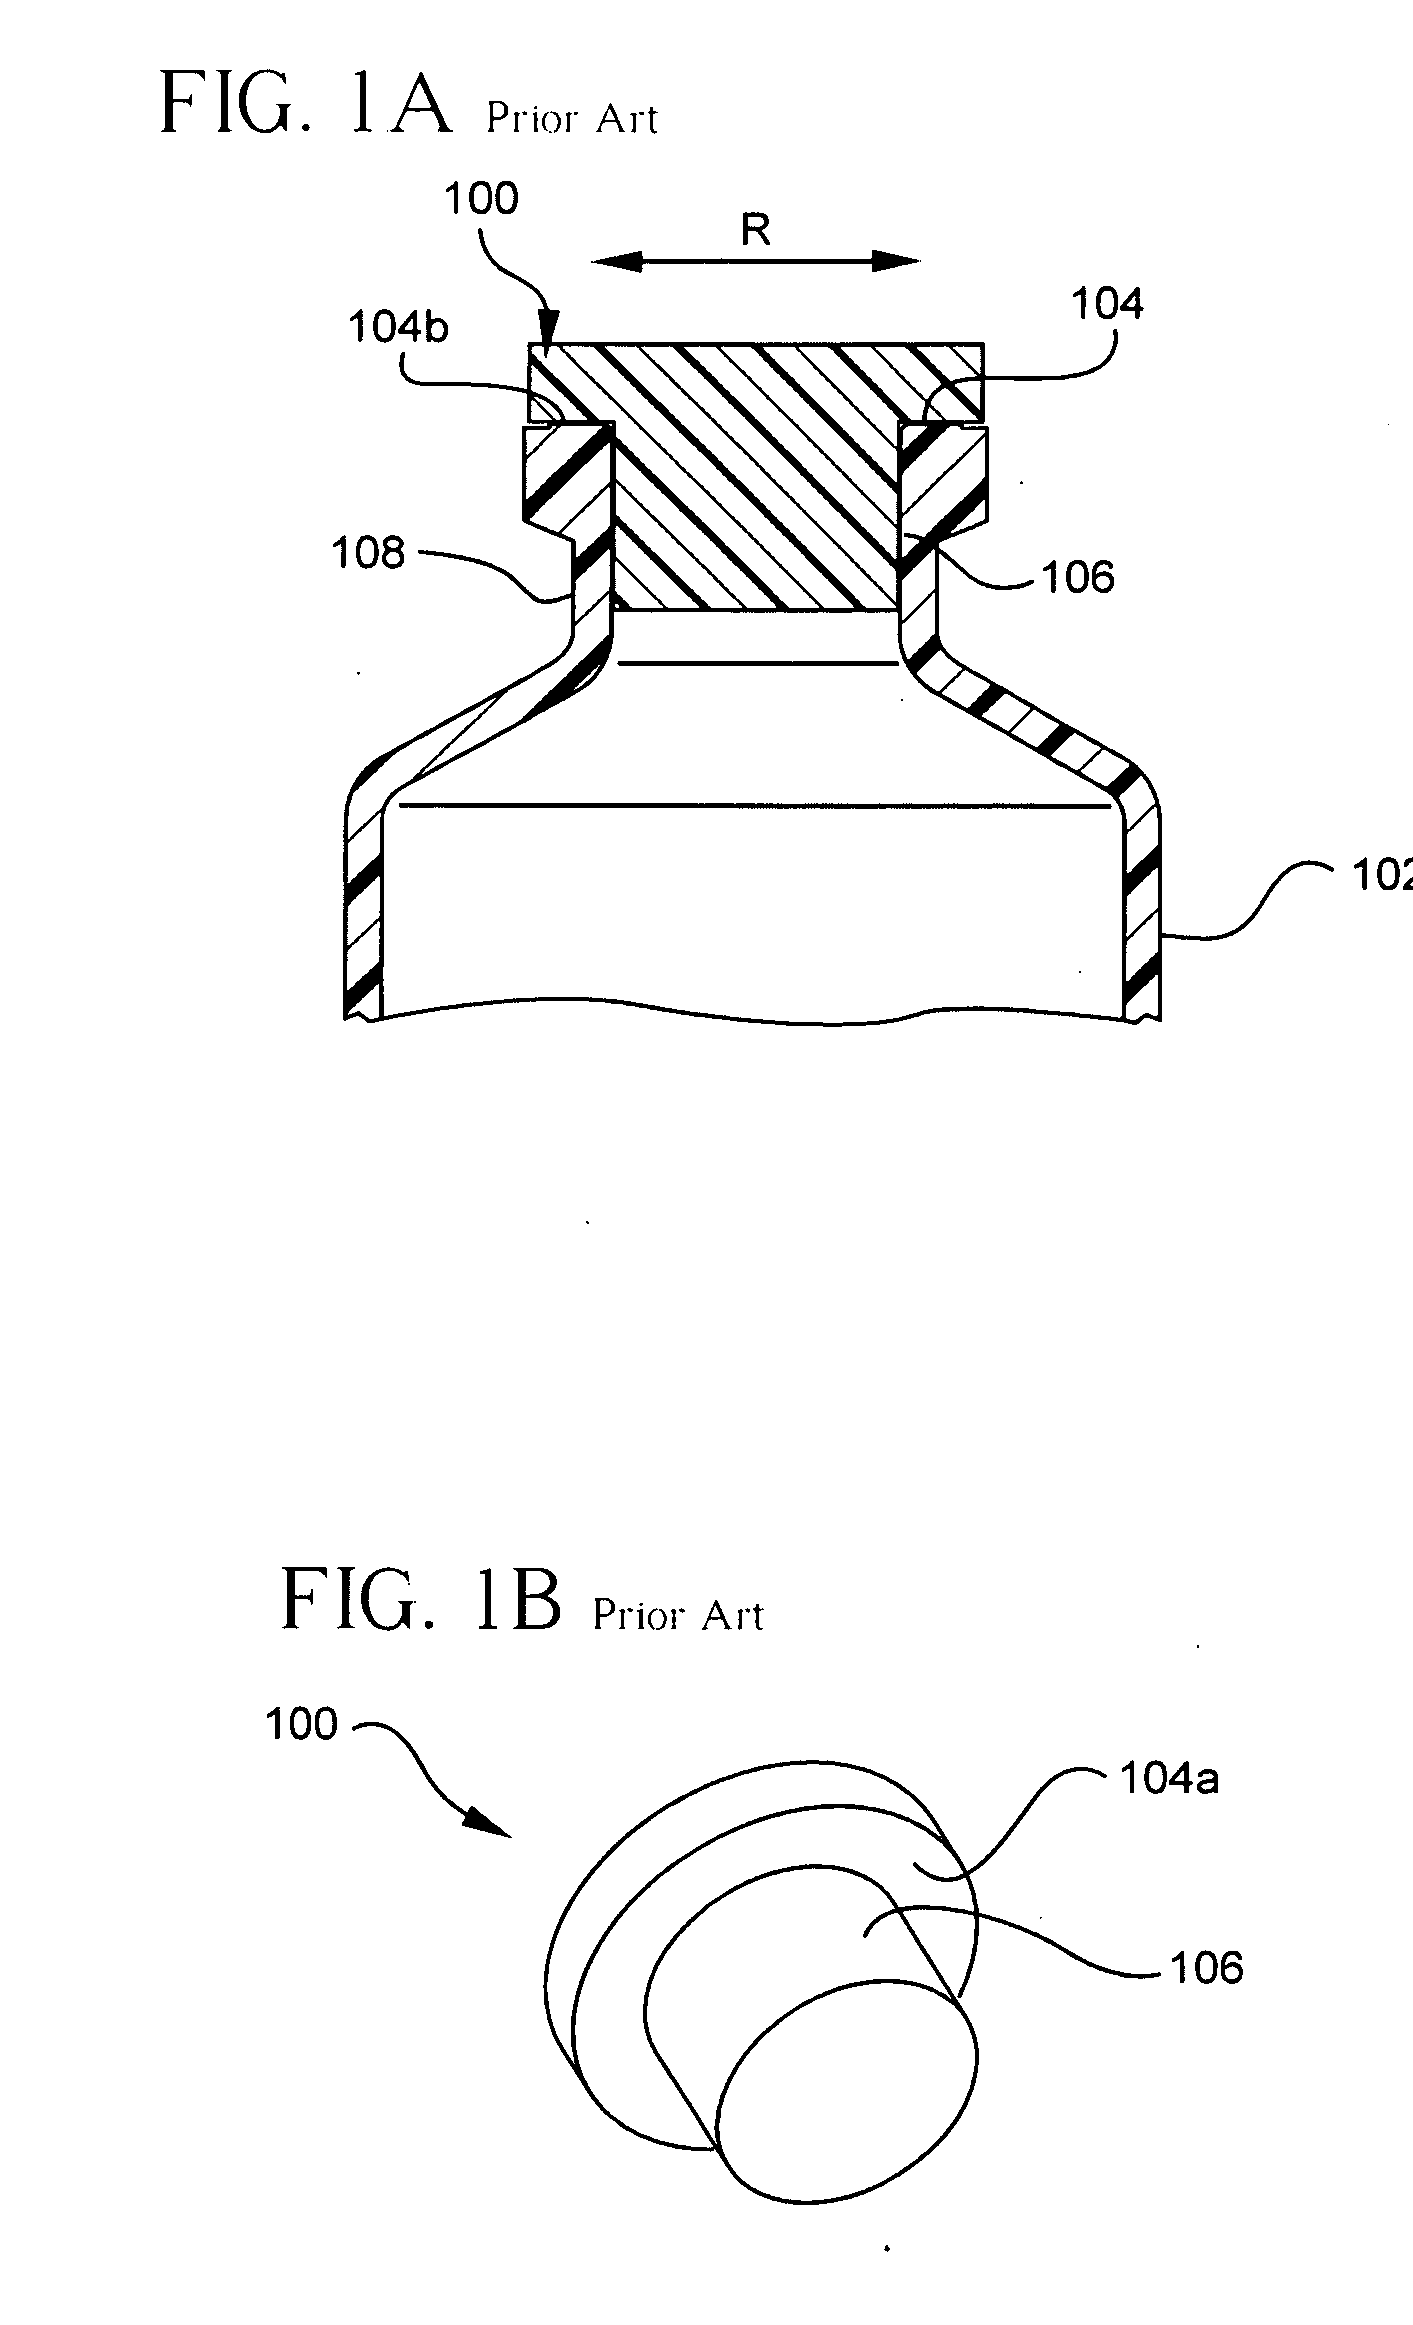 Specimen enclosure apparatus and containers and closure devices for the same